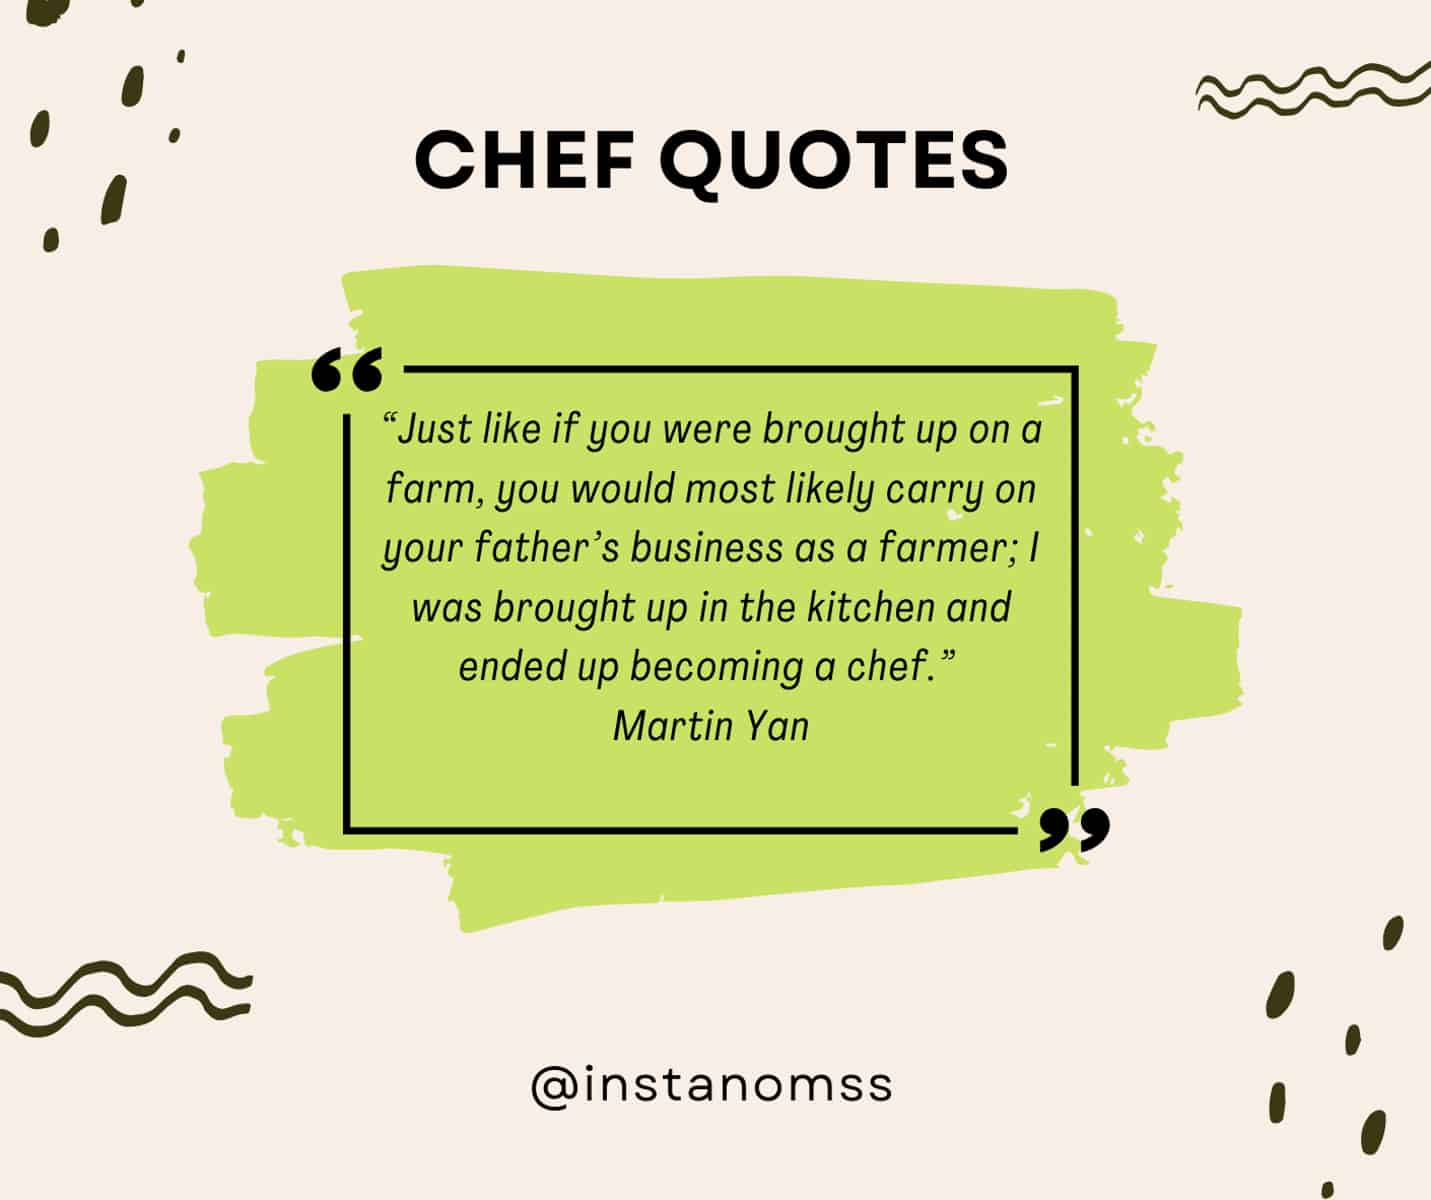 “Just like if you were brought up on a farm, you would most likely carry on your father’s business as a farmer; I was brought up in the kitchen and ended up becoming a chef.” Martin Yan